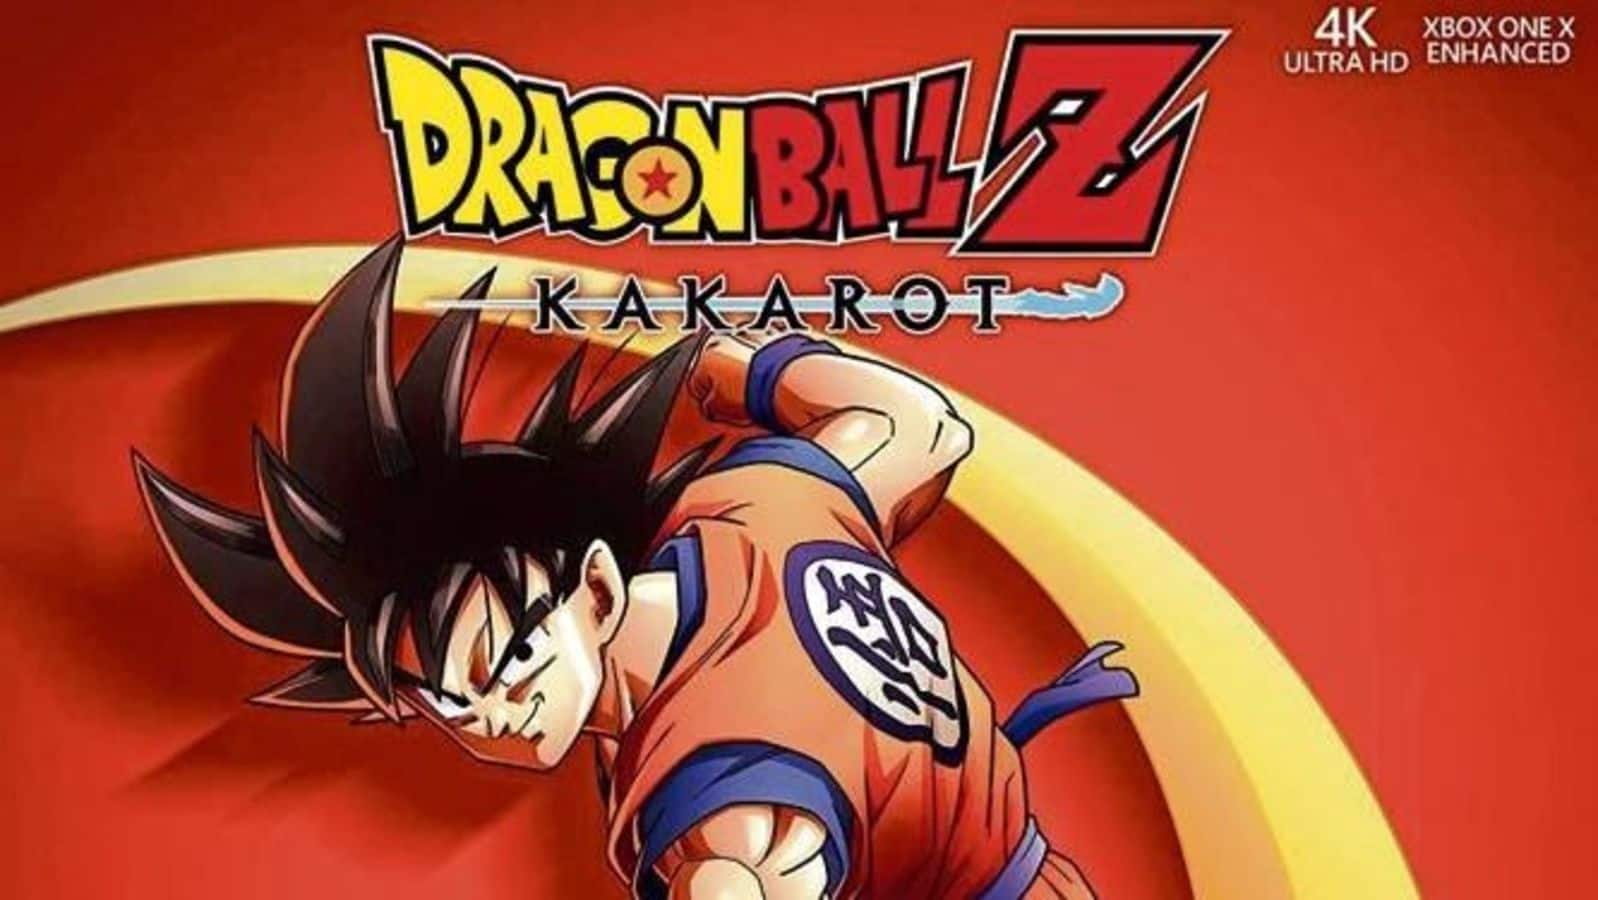 anna claire smith recommends dragon ball super manga torrent pic